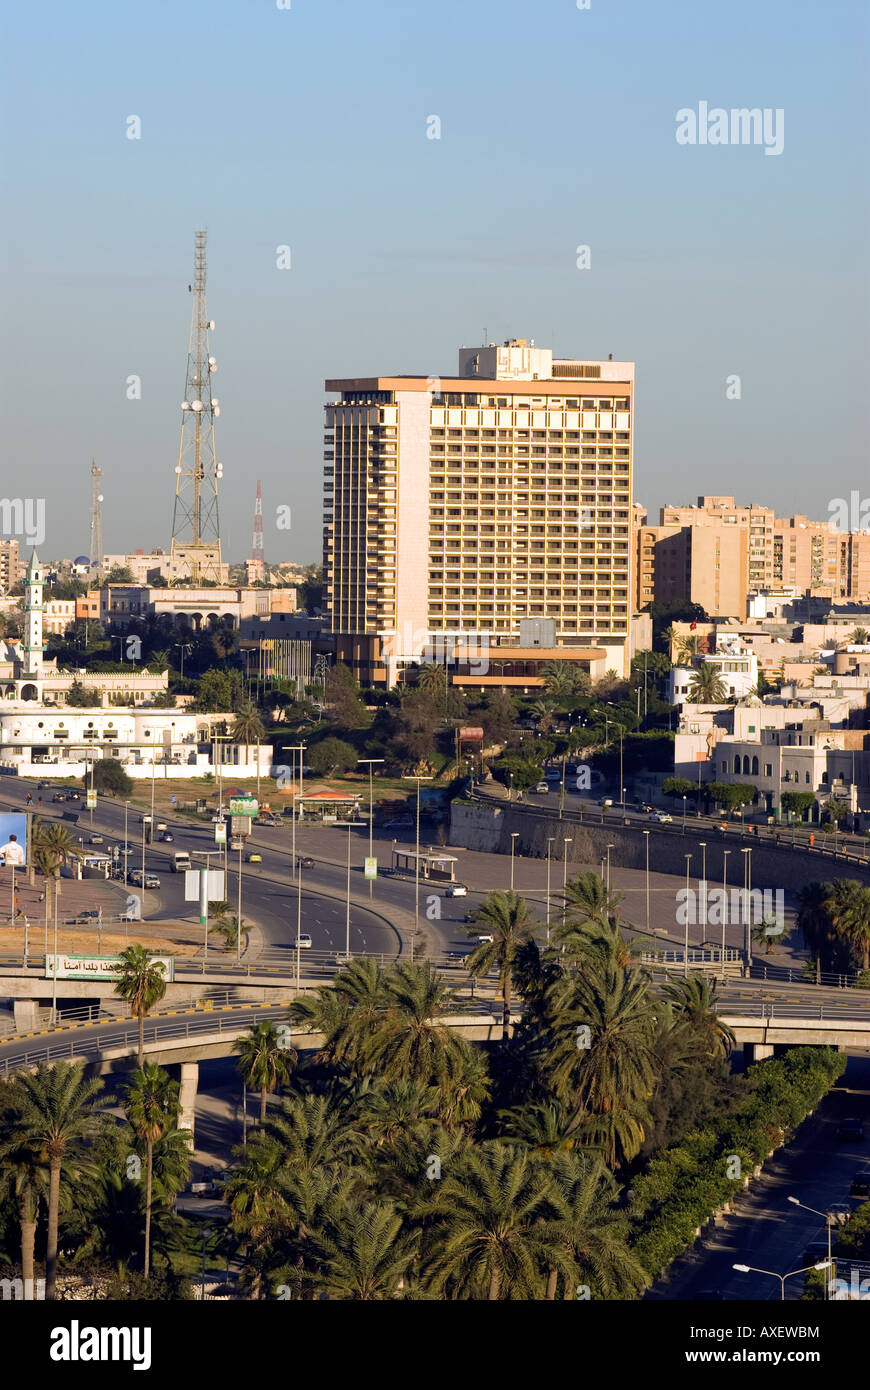 General view of the city of Tripoli Libya Stock Photo